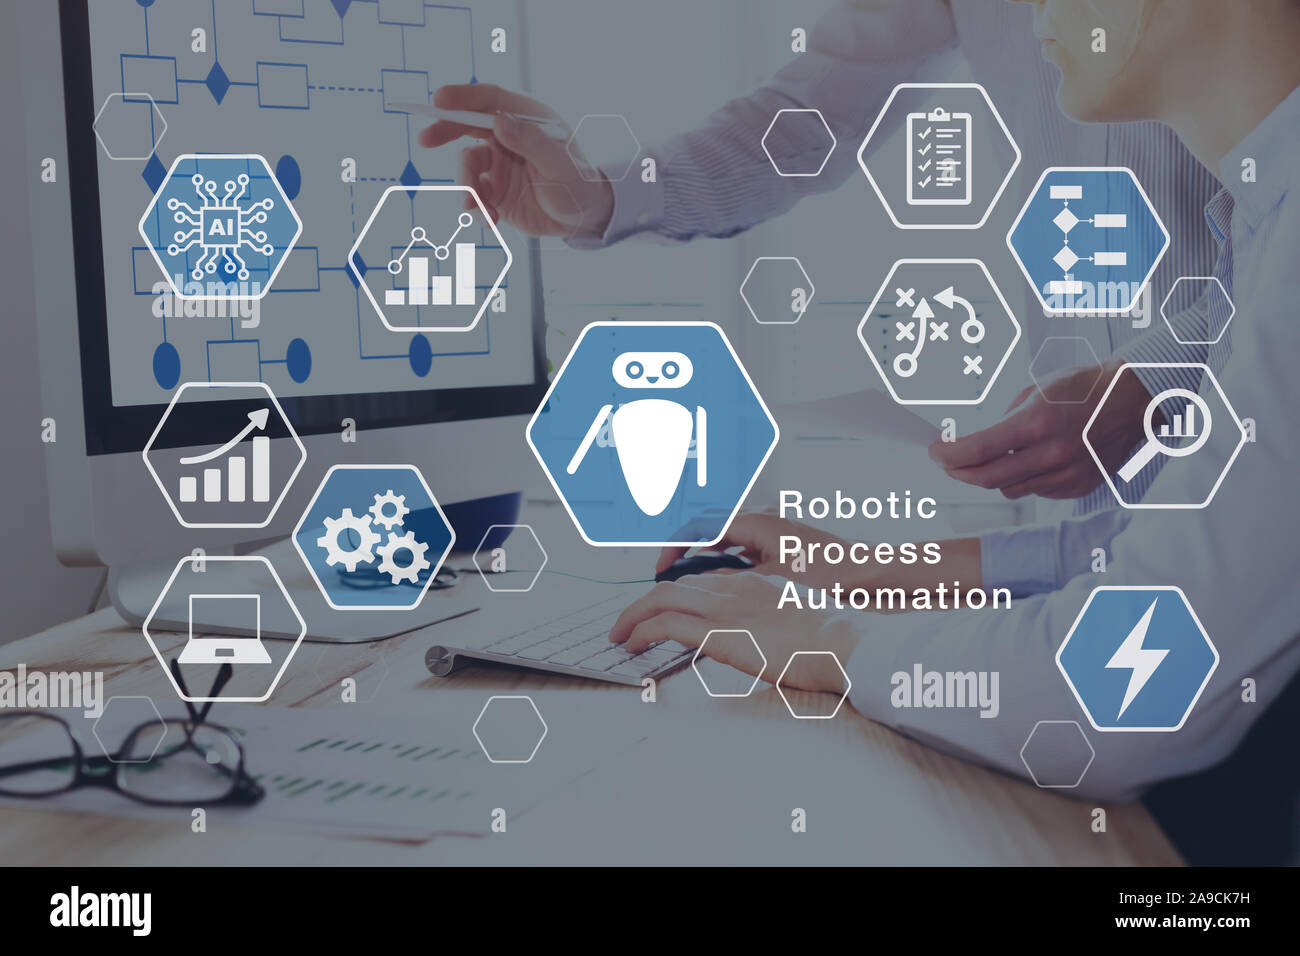 Robotic Process Automation (RPA) technology automate business tasks with direct integration of robots in company software user interface, concept with Stock Photo